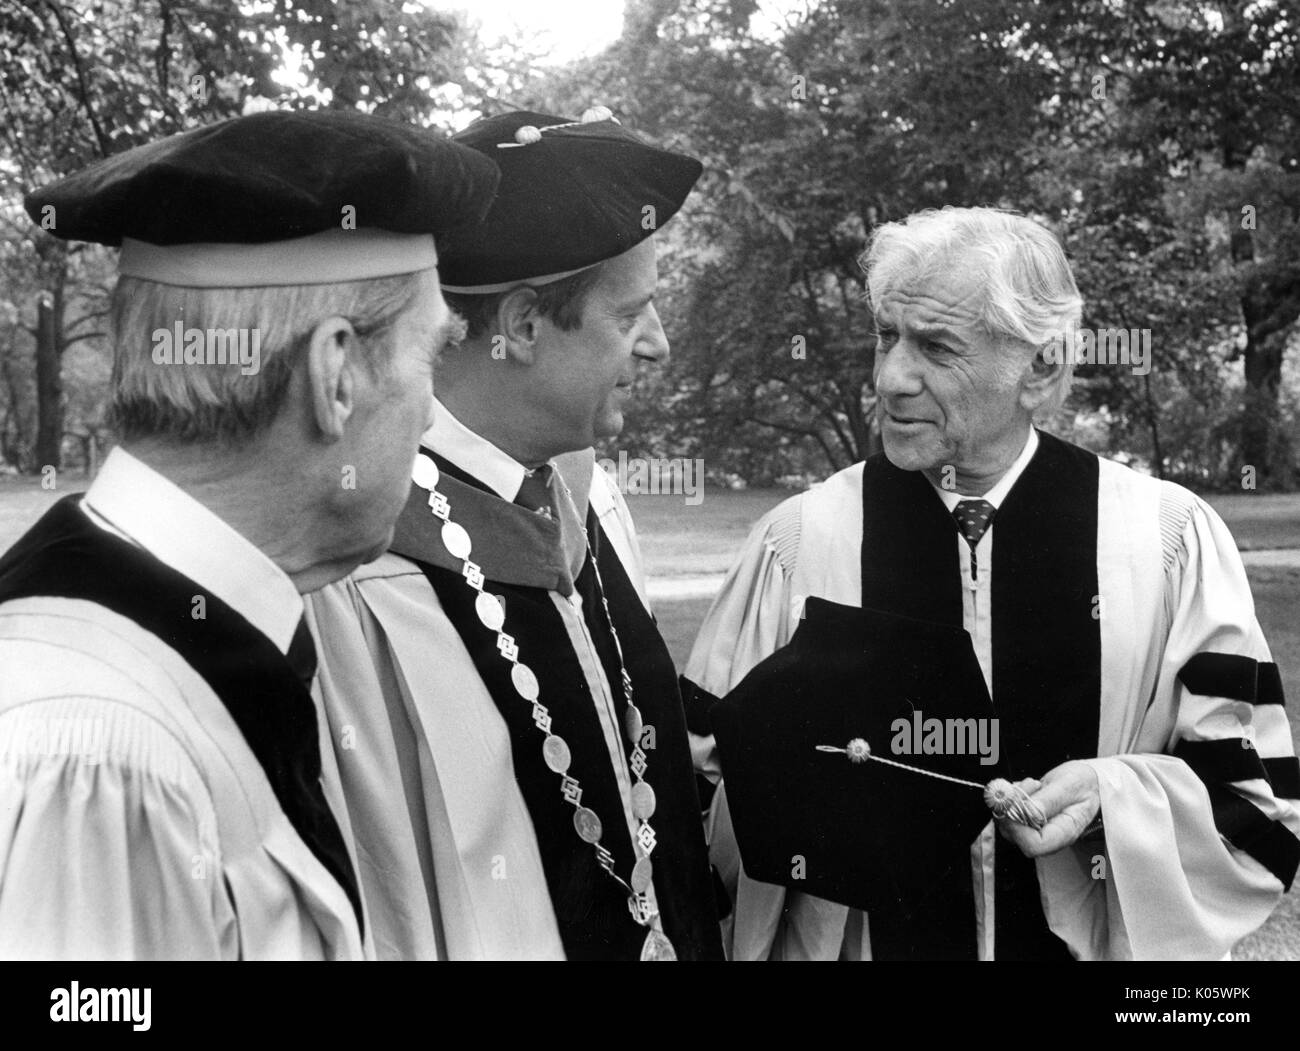 Half-body portrait of three men at 1980 Johns Hopkins commencement, all in cap and gown attire, from left to right: Daniel K Ludwig, President Steven Muller, and Leonard Bernstein, who has removed his hat and drawn the other two's attention towards him, May 30, 1980. Stock Photo